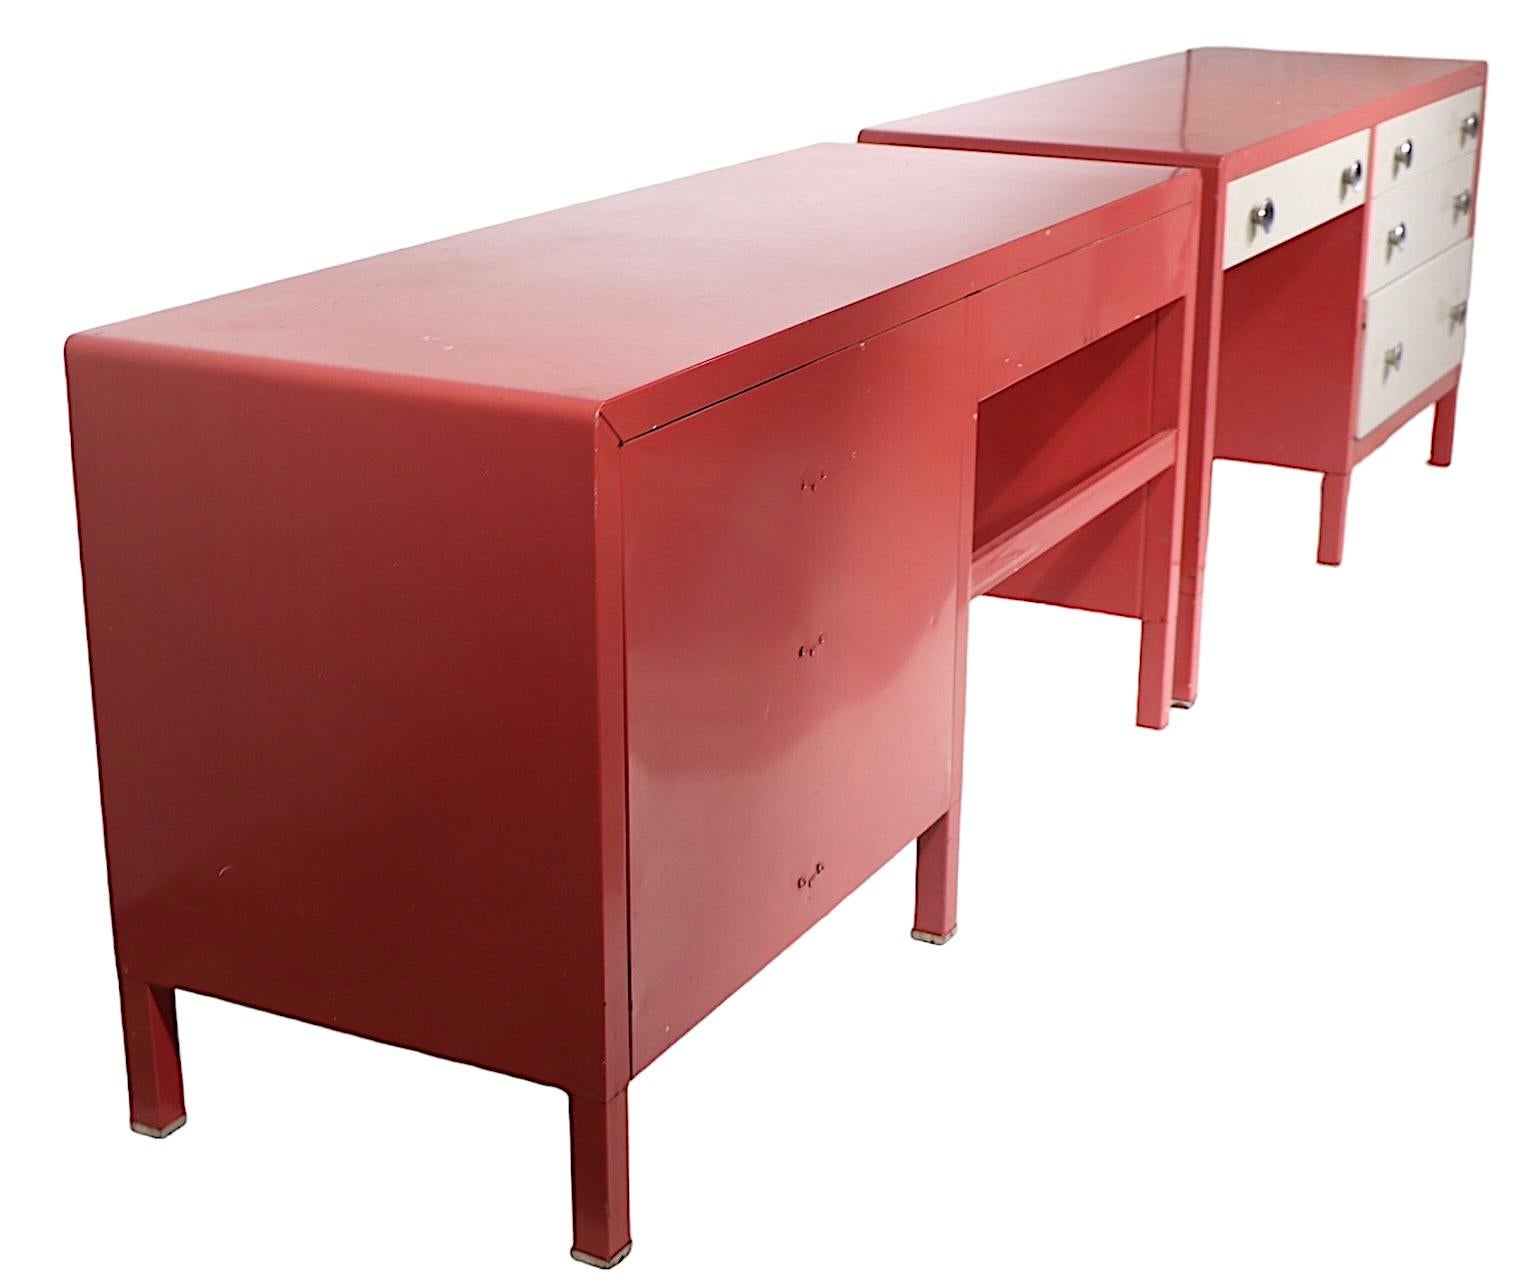 Mid-20th Century Art Deco Machine Age Industrial Desks by Bel Geddes for Simmons Furniture Co.  For Sale